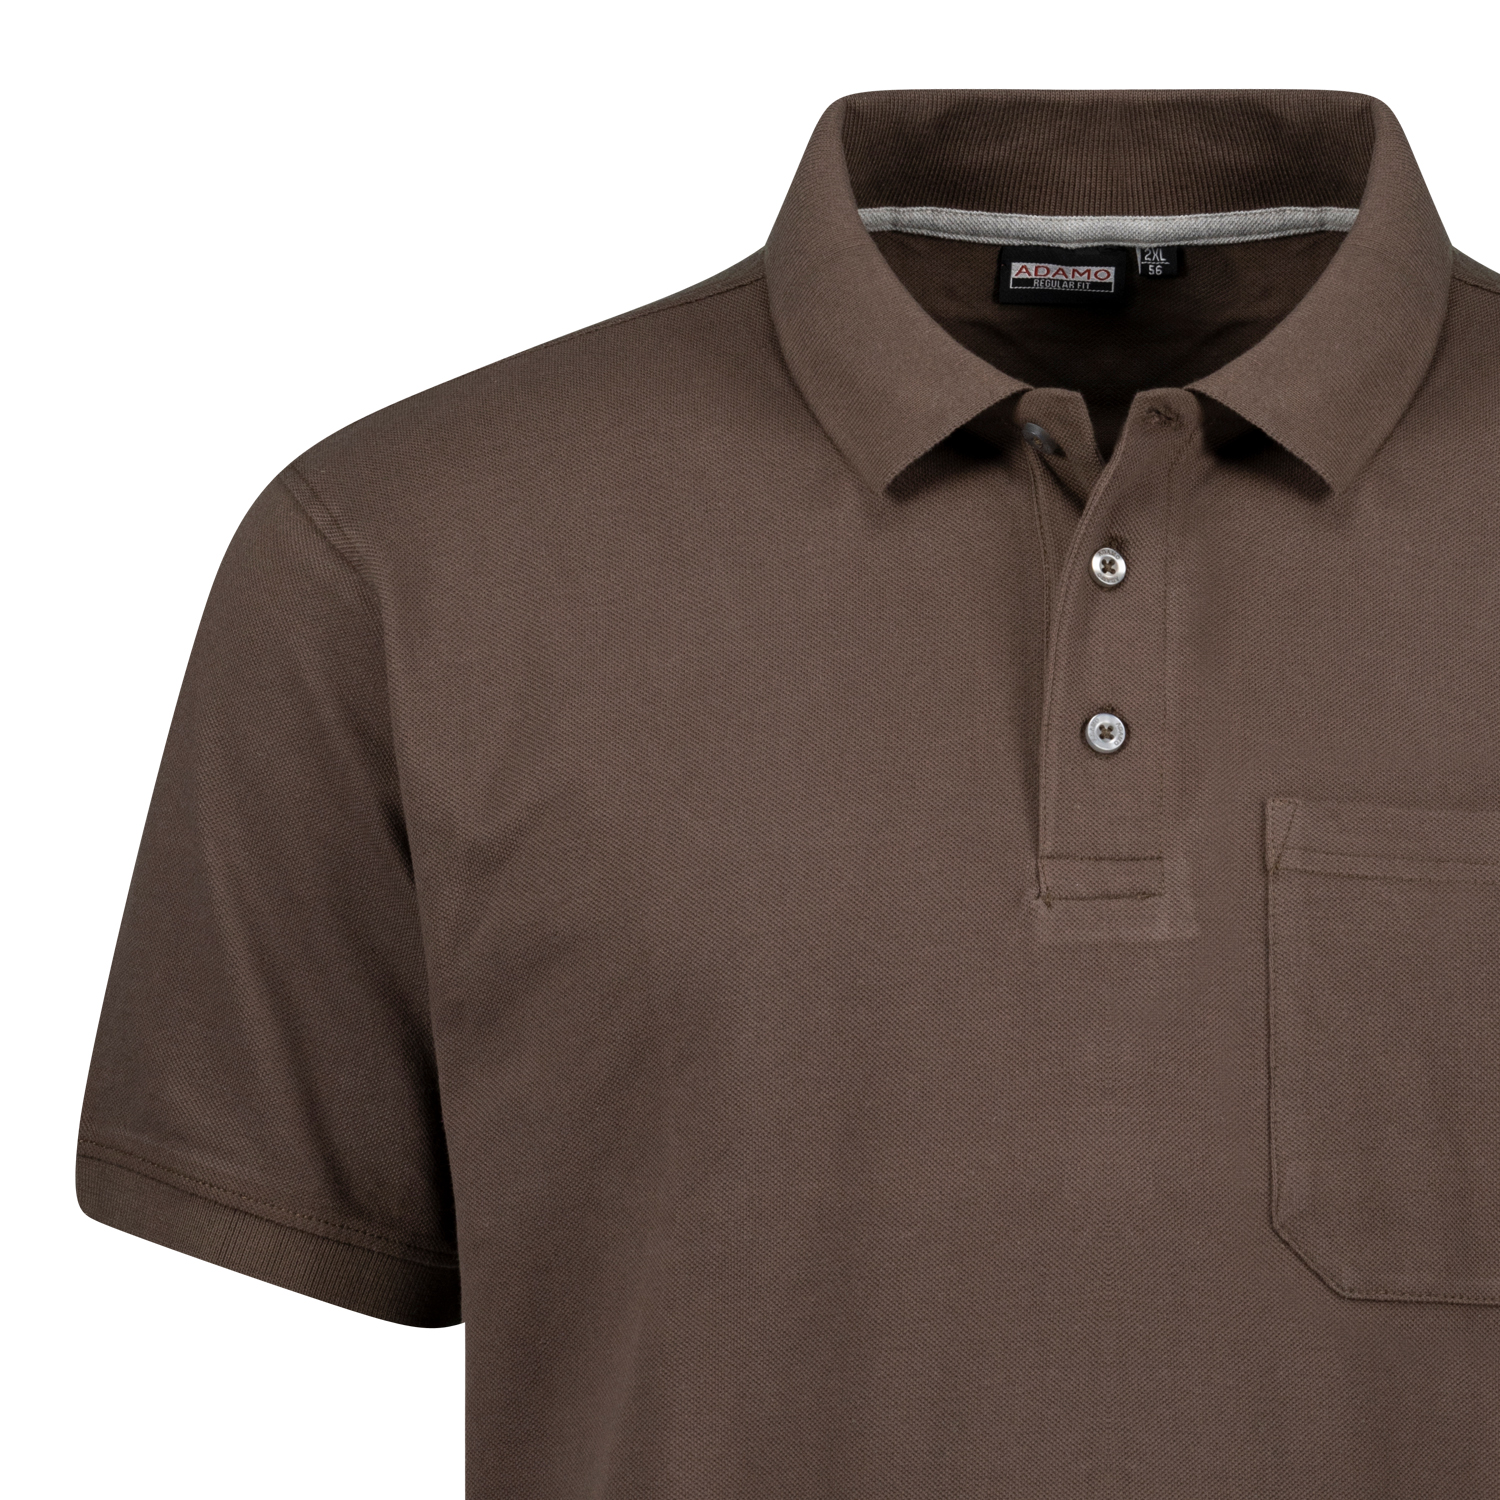 Short sleeve polo shirt REGULAR FIT series Klaas by Adamo in brown up to oversize 10XL